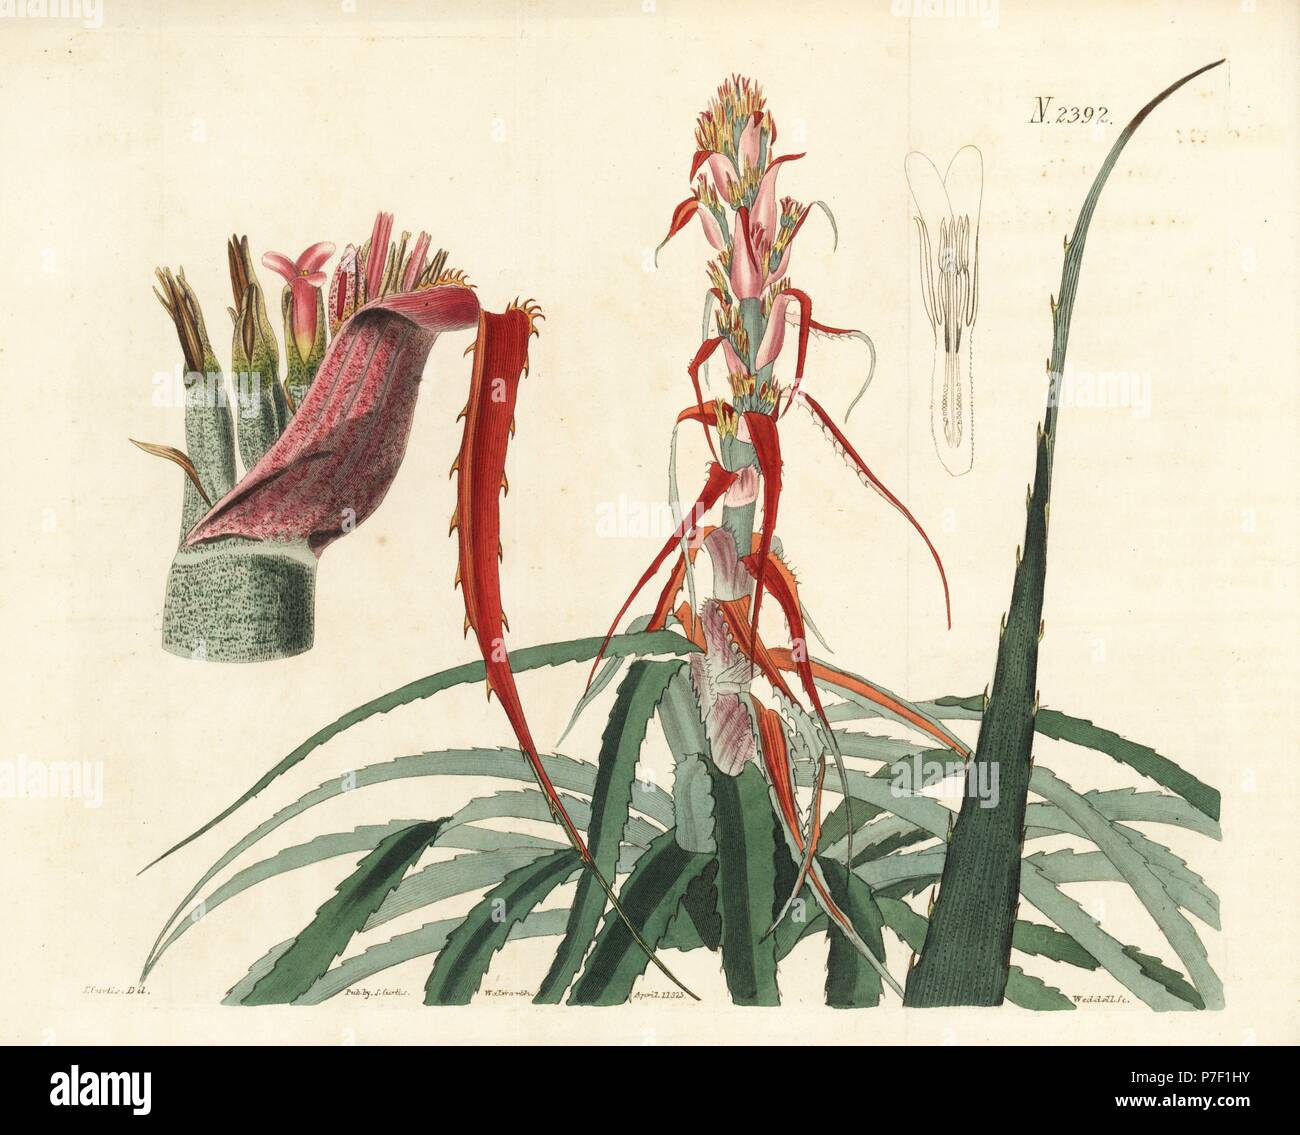 Aguava, Bromelia alsodes (Narrow leaved pineapple, Bromelia sylvestris). Handcoloured copperplate engraving by Weddell after a botanical illustration by John Curtis from William Curtis' Botanical Magazine, Samuel Curtis, London, 1823. Stock Photo